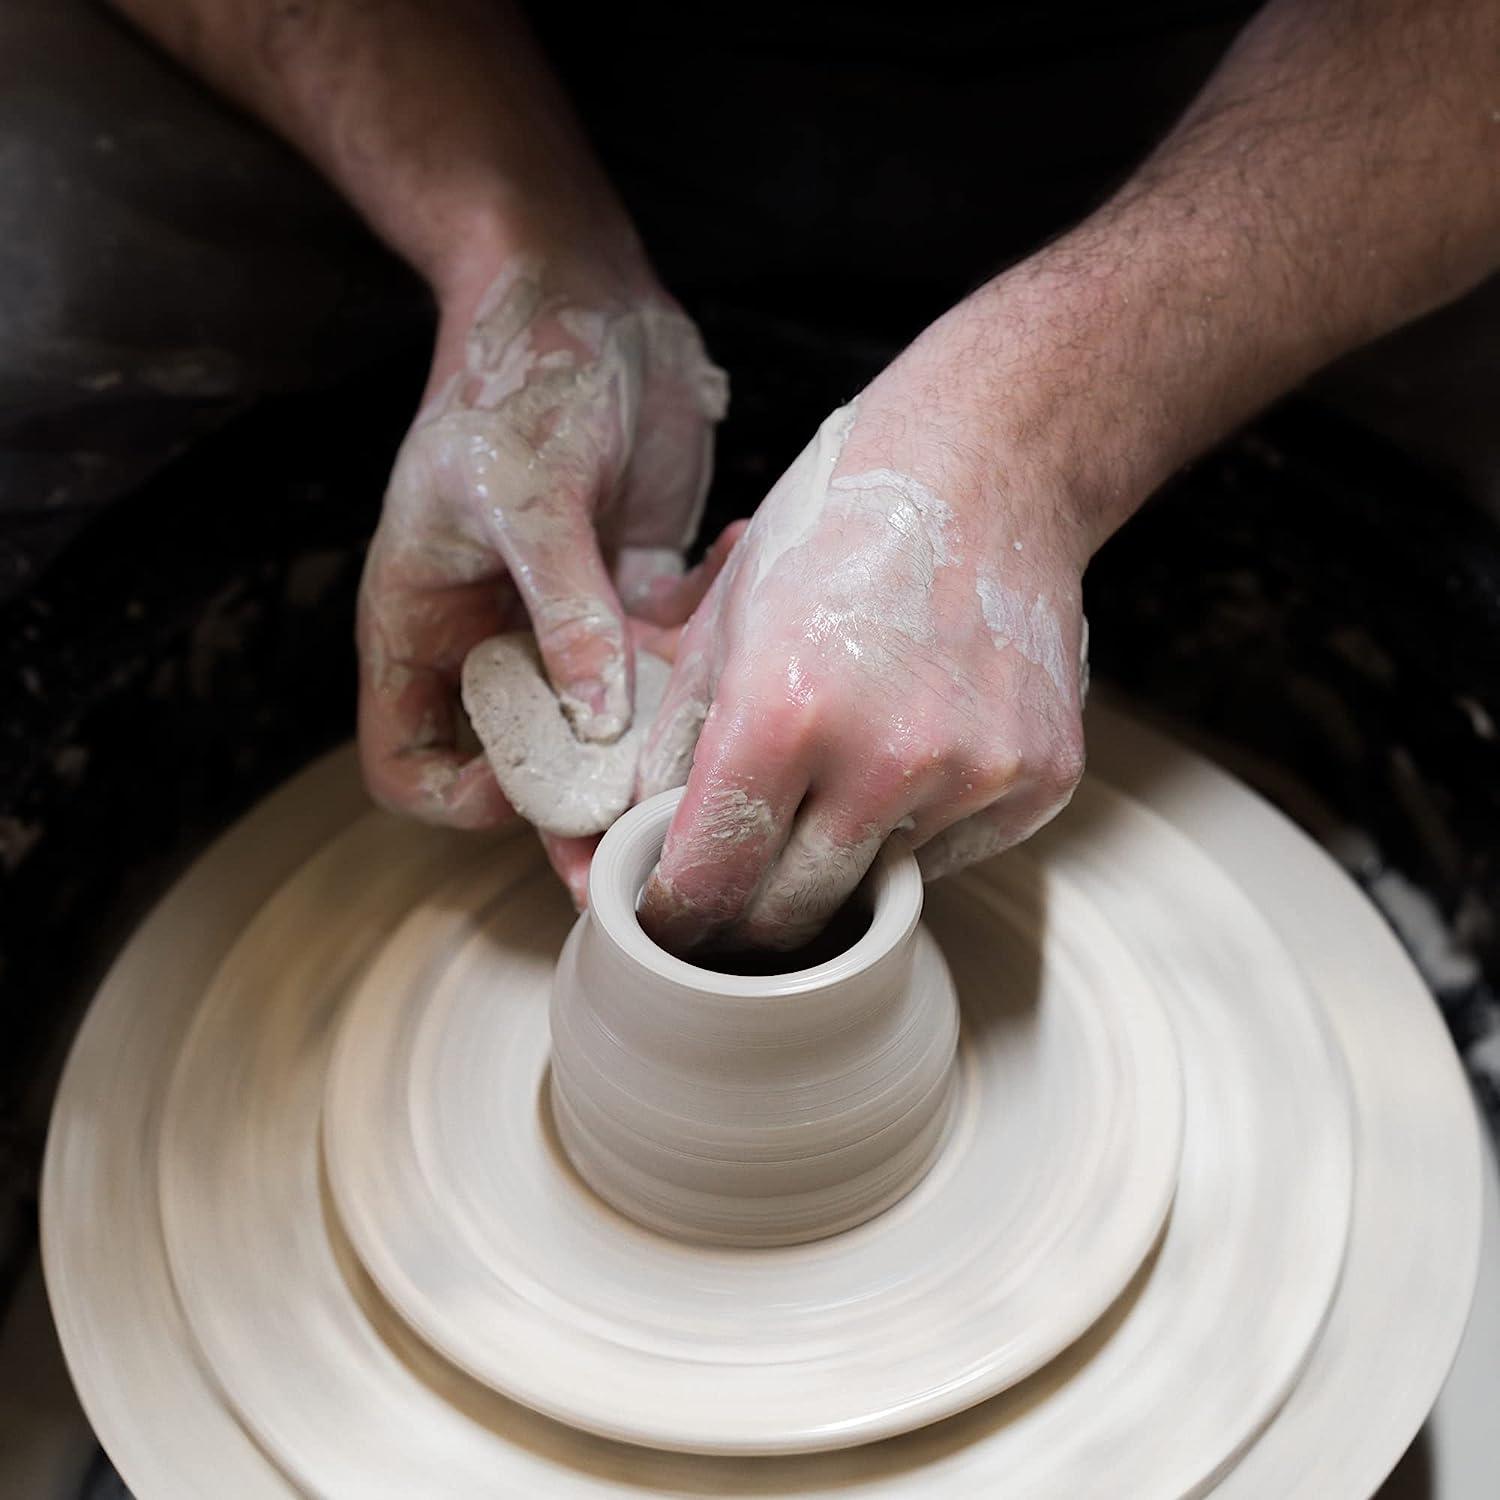 Deouss Mid High Fire White Stoneware Clay for Pottery Mid Fire Cone 5-7 Ideal for Wheel Throwing Hand Building Sculpting Great for All Skill Levels W